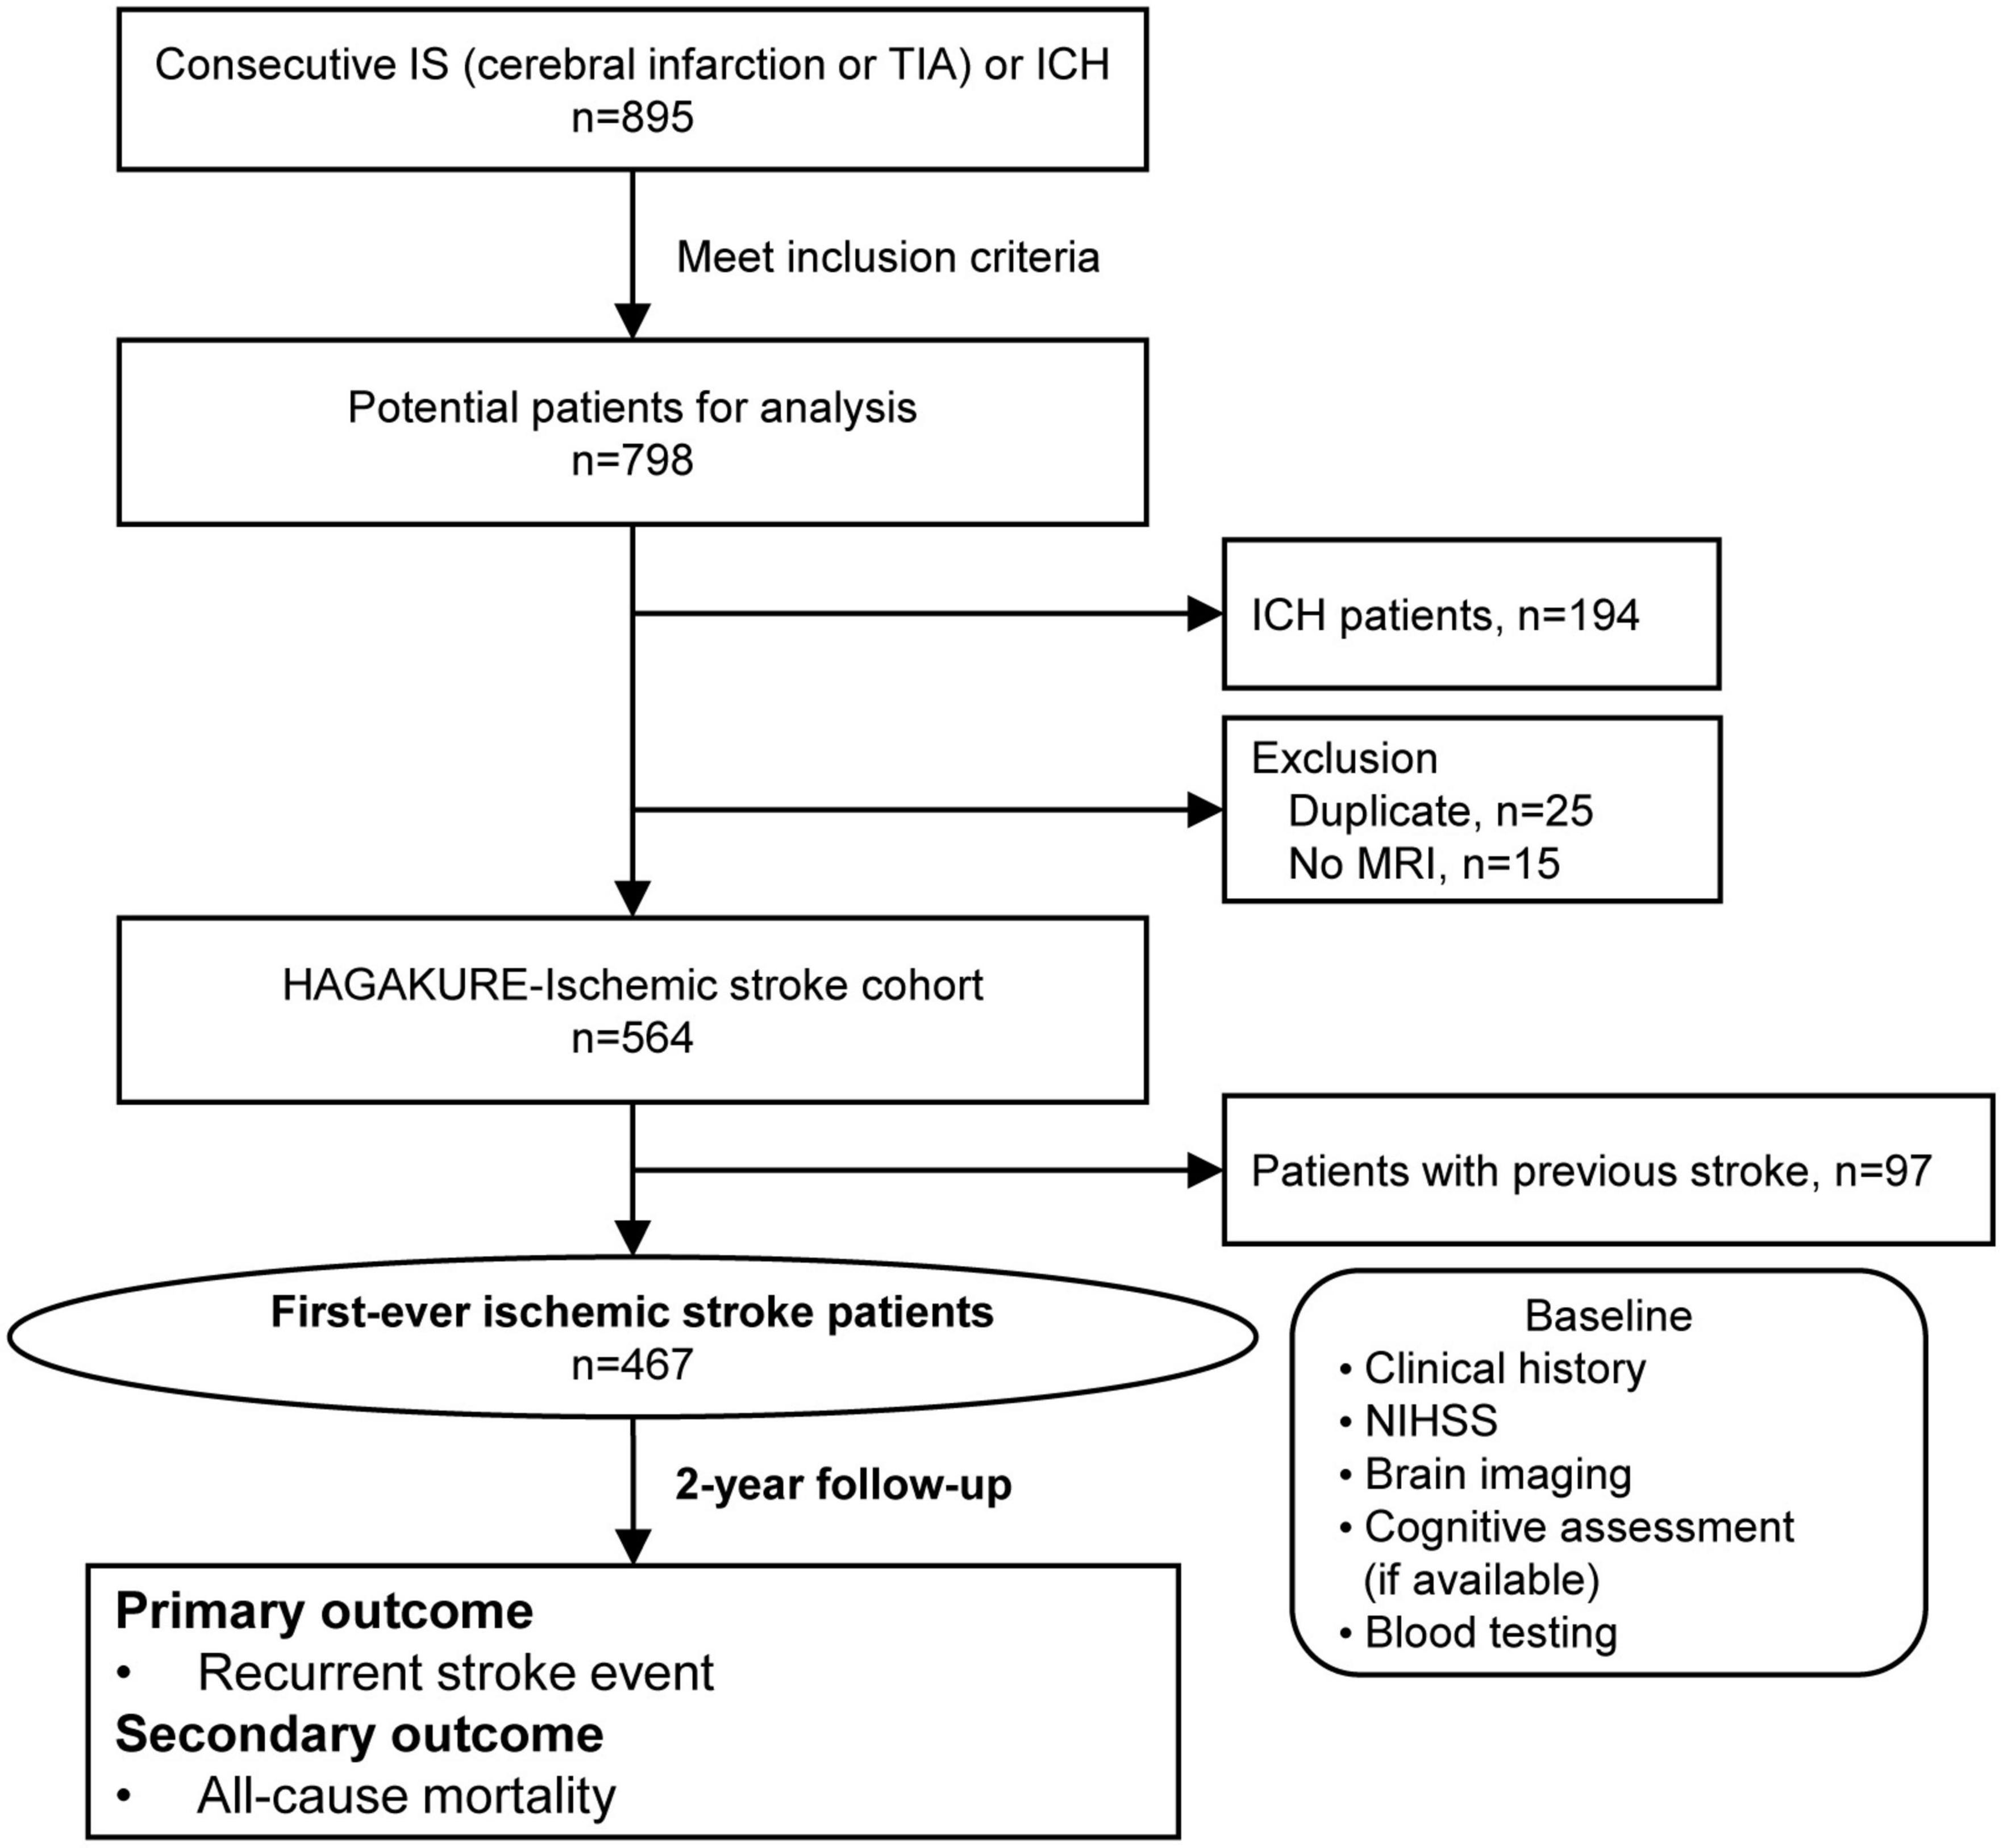 Hypertension, cerebral Amyloid, aGe Associated Known neuroimaging markers of cerebral small vessel disease Undertaken with stroke REgistry (HAGAKURE) prospective cohort study: Baseline characteristics and association of cerebral small vessel disease with prognosis in an ischemic stroke cohort